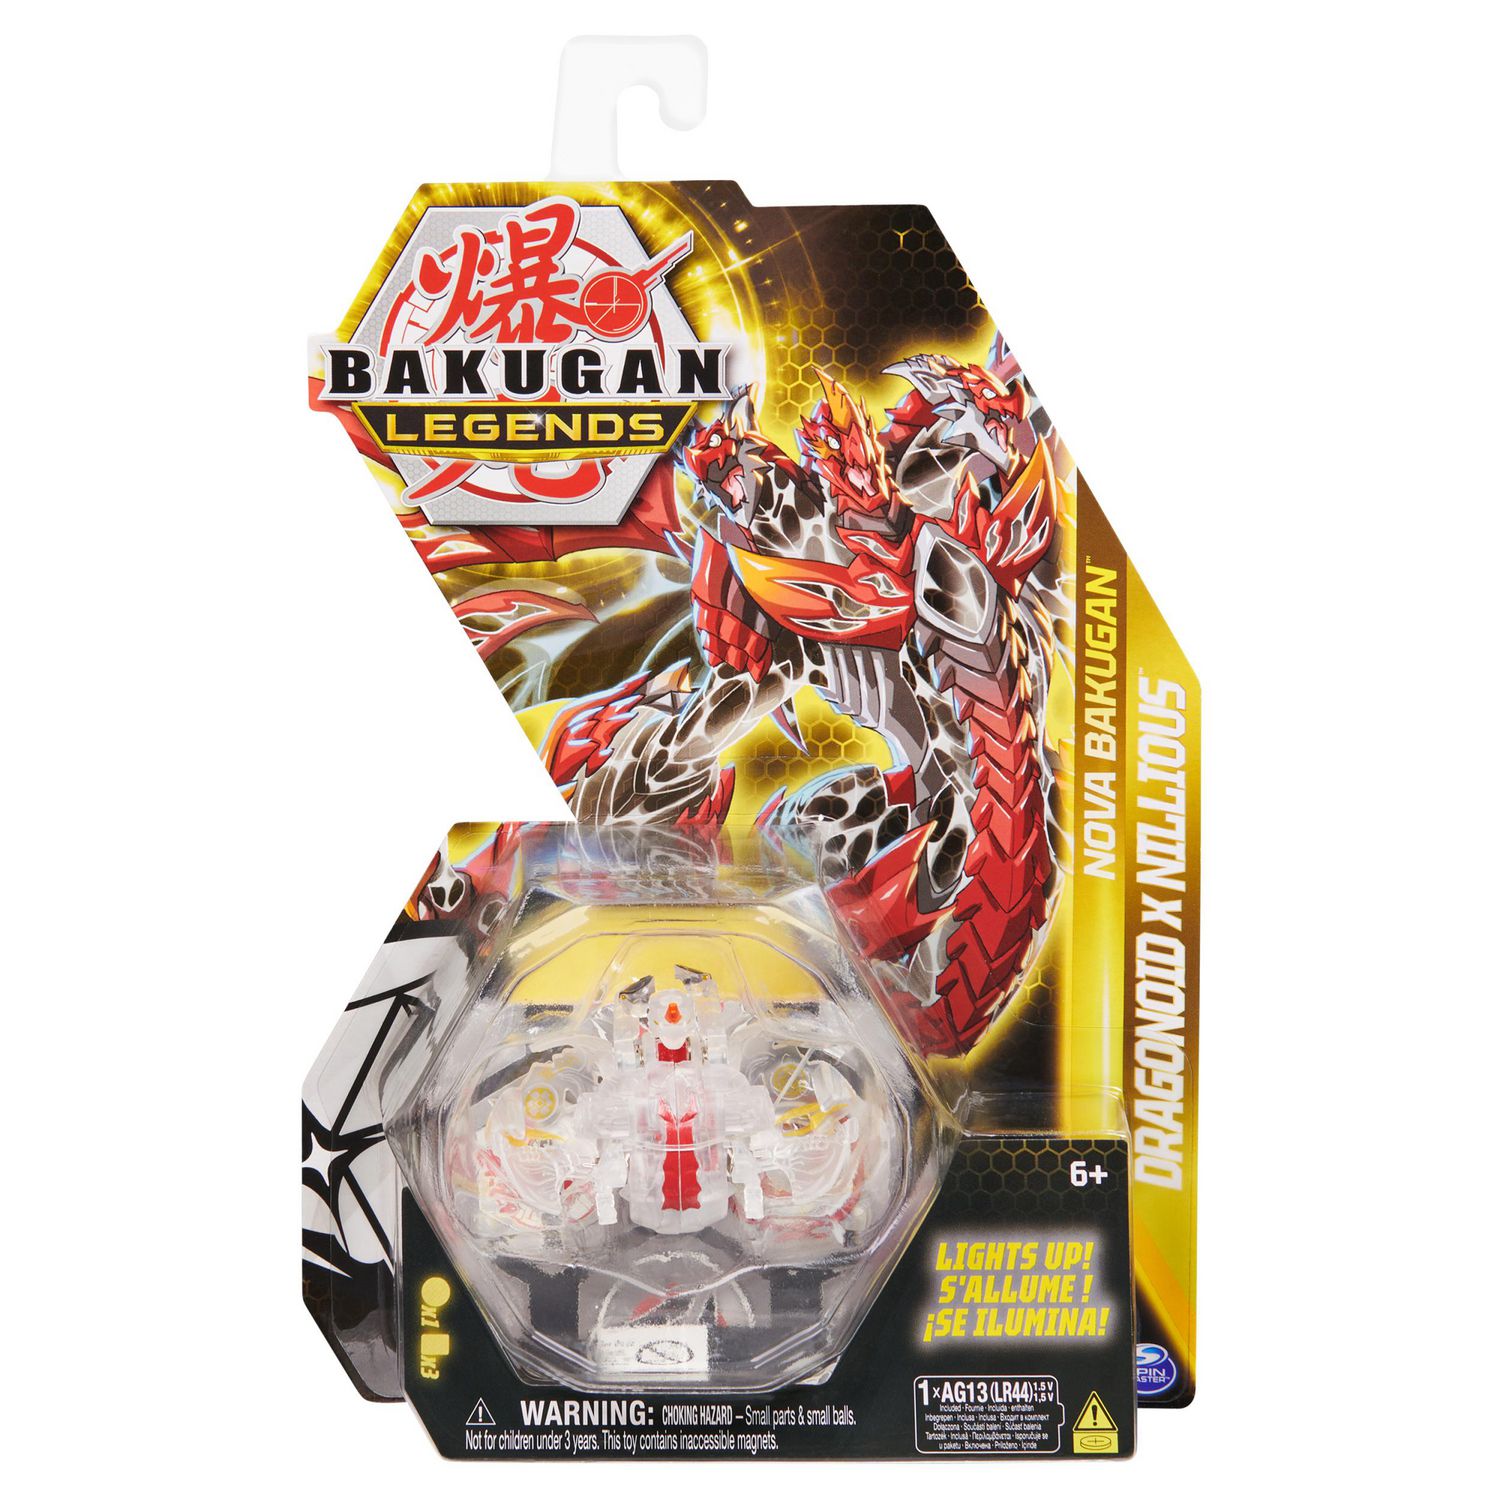 Bakugan Legends, Nova Dragonoid X Nillious (Clear), Light Up Bakugan Action  Figures, 1 Character Card and Metal Gate Card, Kids Toys for Boys Ages 6 